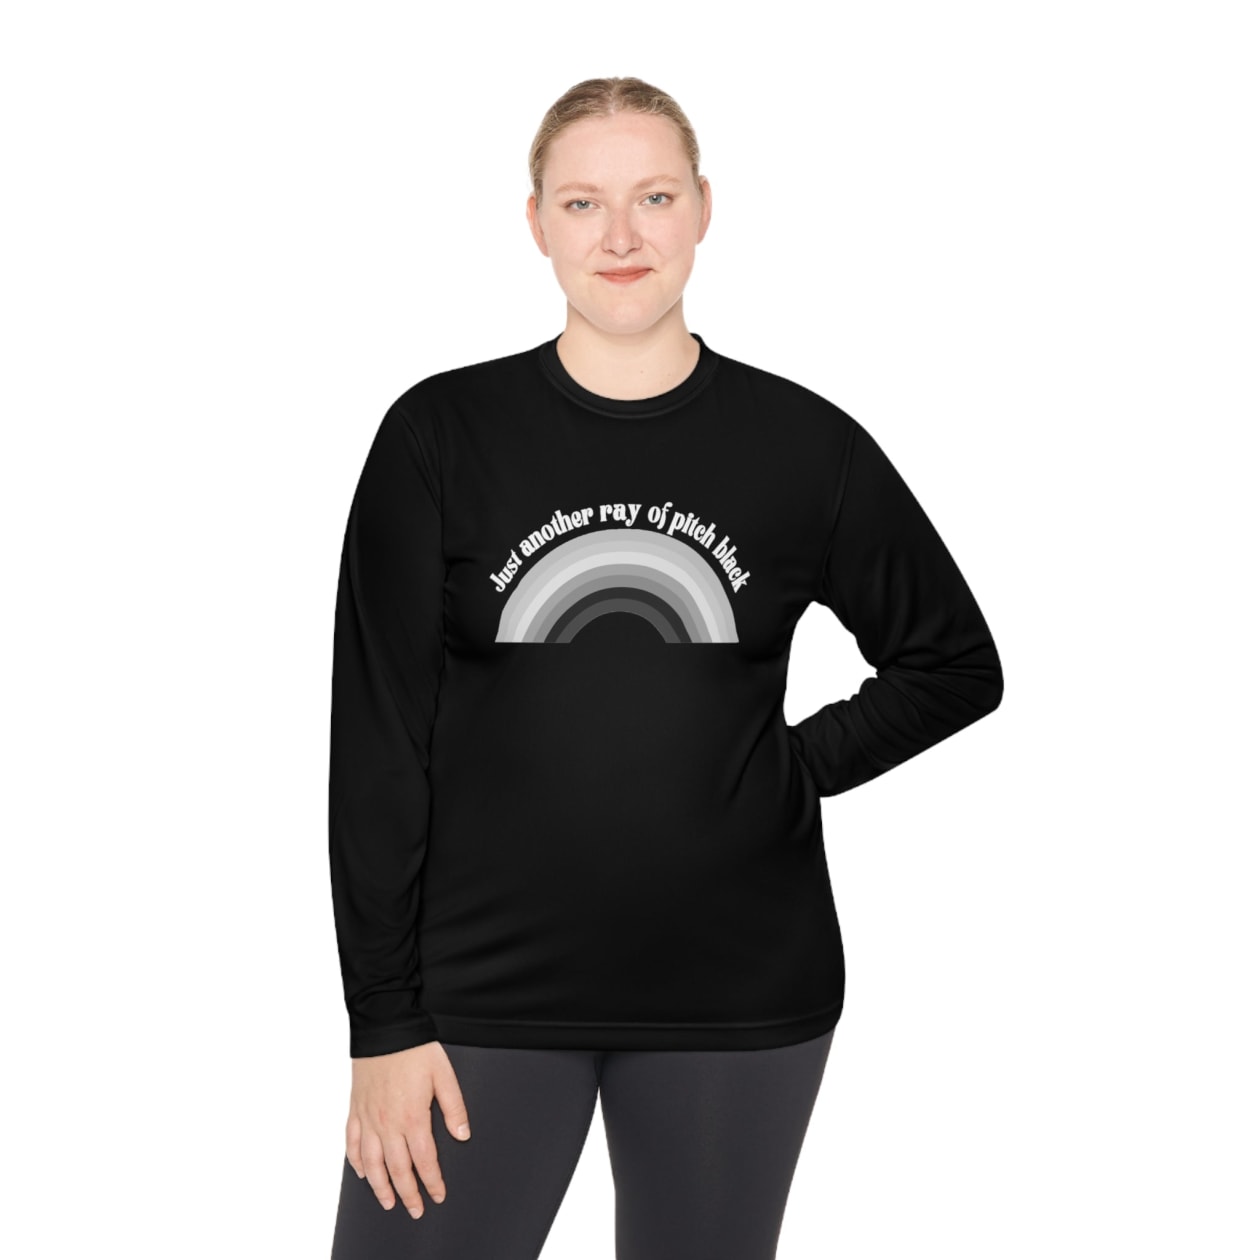 Just Another Ray of Pitch Black Unisex Lightweight Long Sleeve Tee (Sizes through 4X) - Color: Black, Size: XS